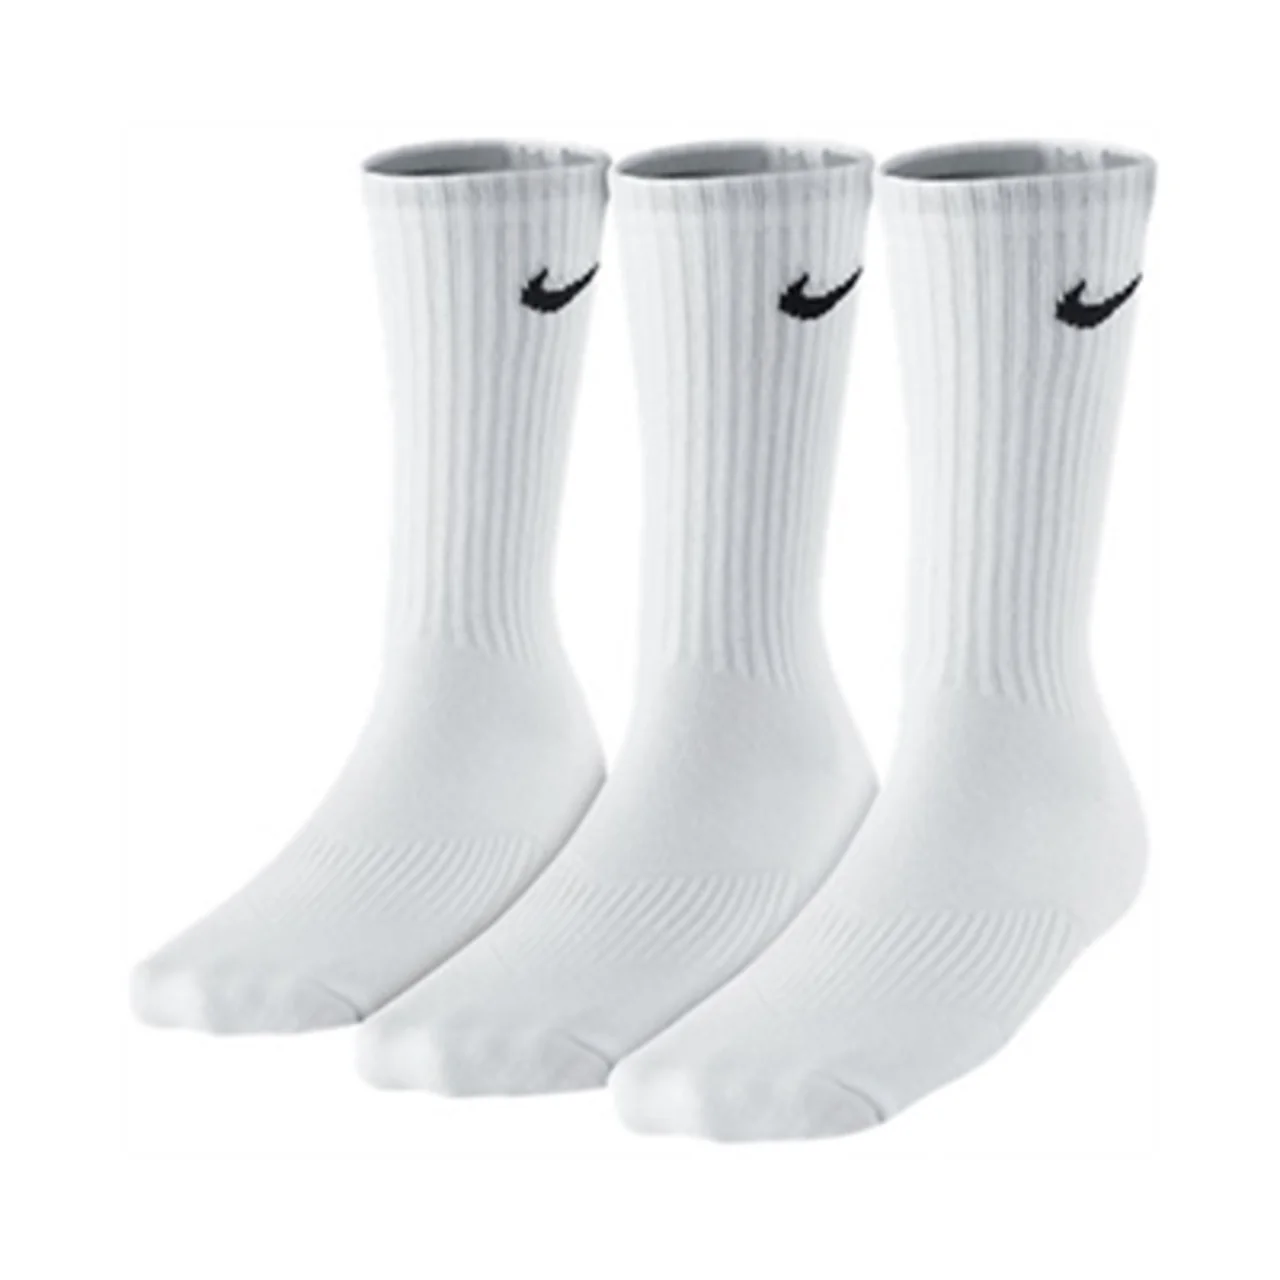 Nike Performance Cotton 3-pack White